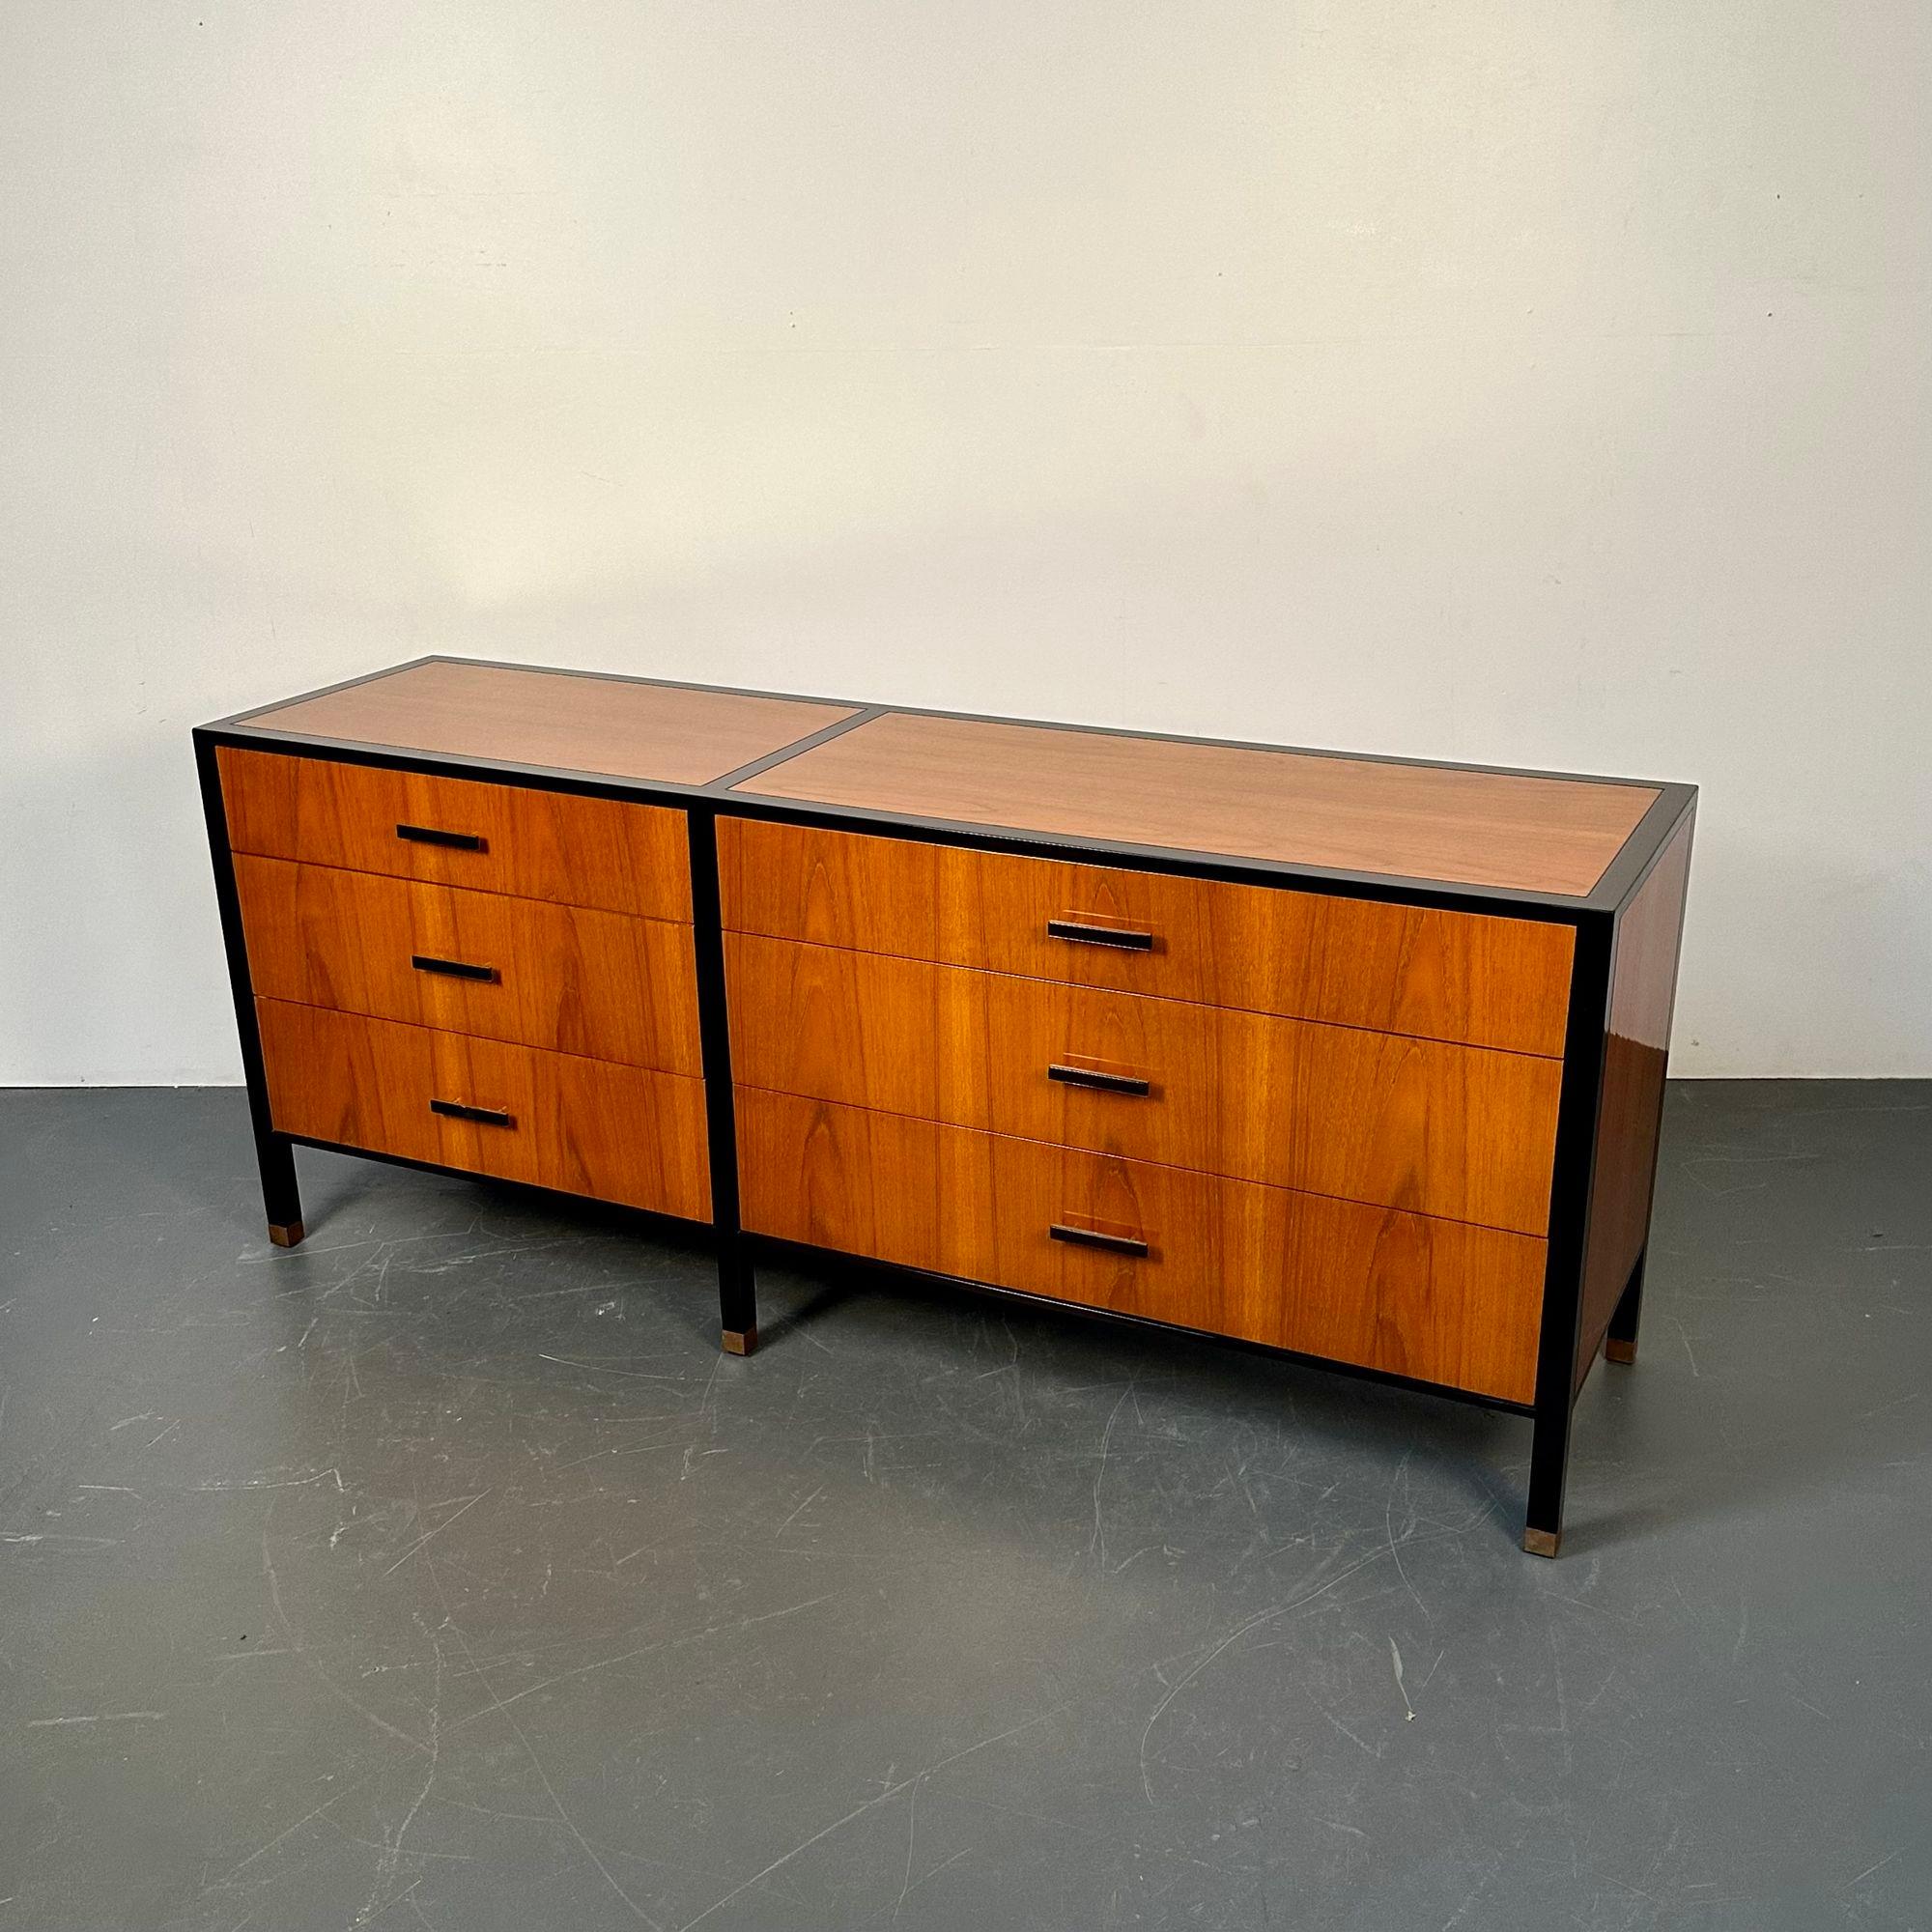 American Mid-Century Modern Rosewood Dresser / Sideboard by Harvey Probber 1960s For Sale 1